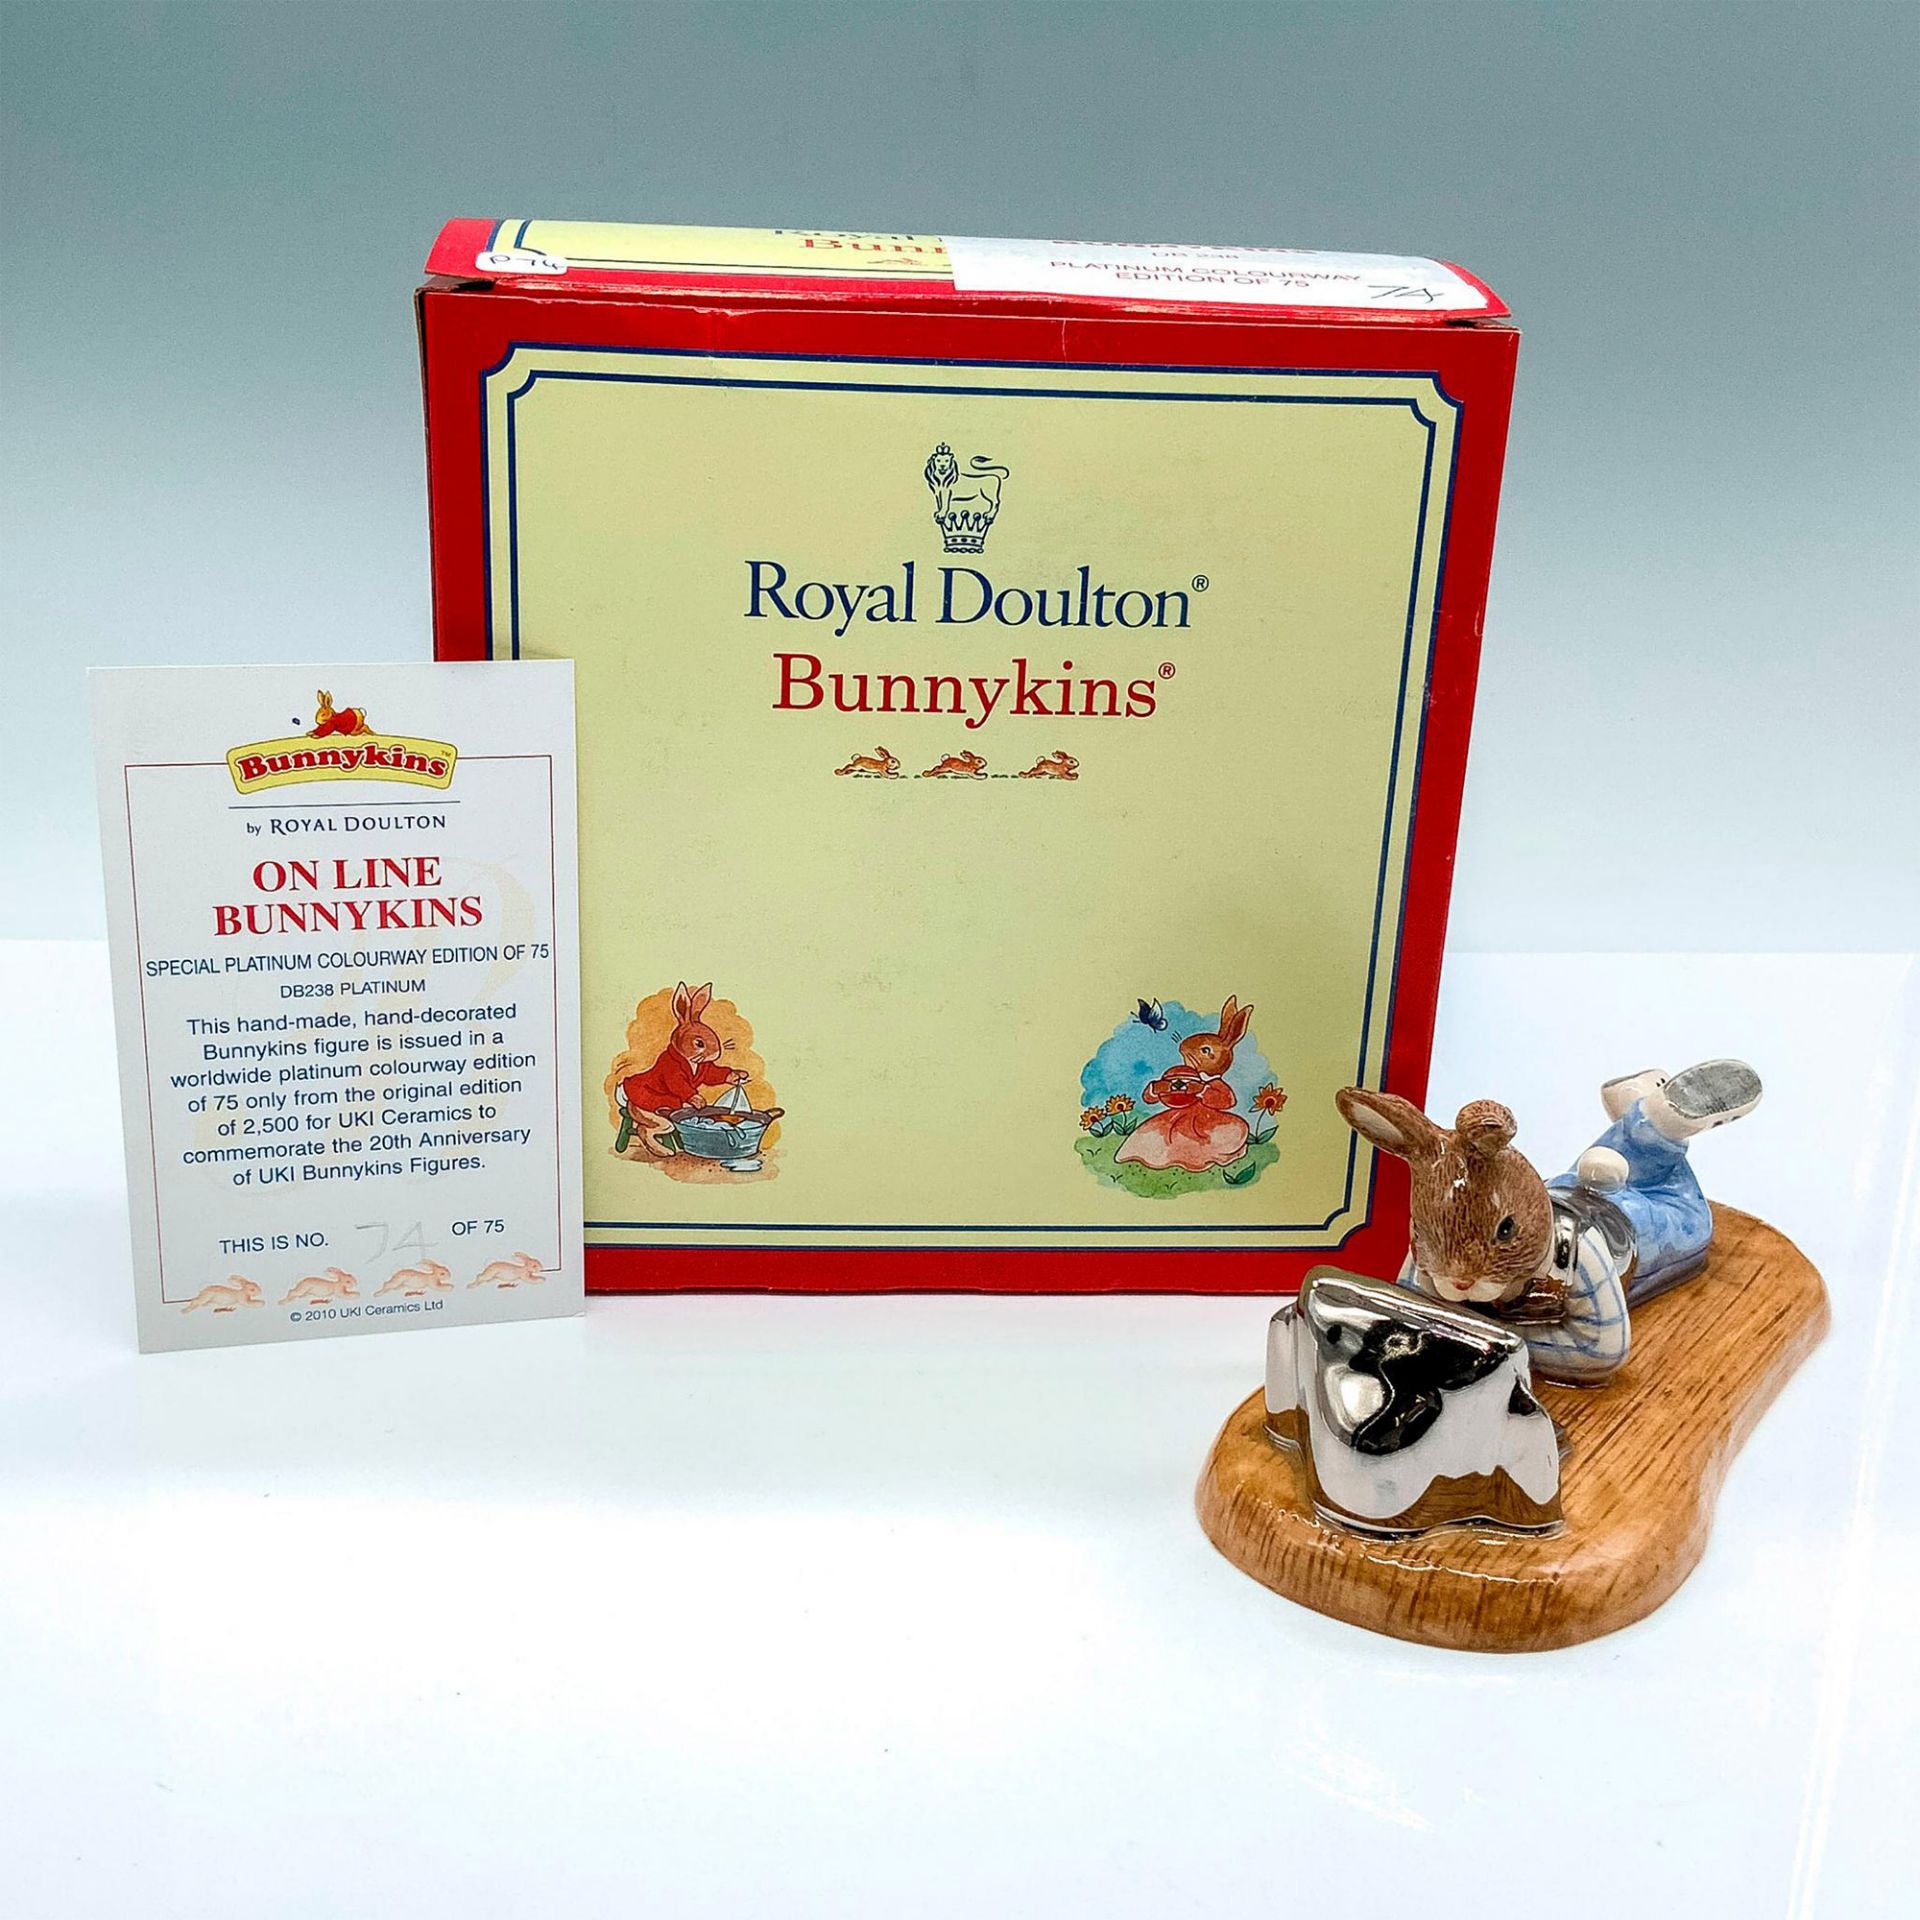 Royal Doulton Bunnykins, LE Platinum Issue On Line DB238 - Image 5 of 5